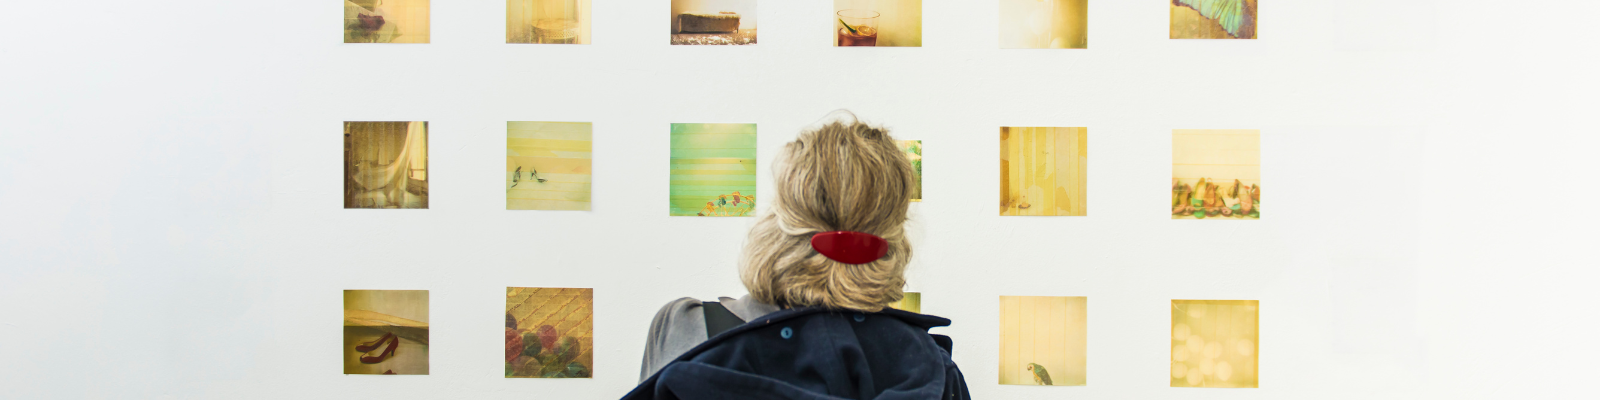 Woman looking at a photography exhibit on a white wall